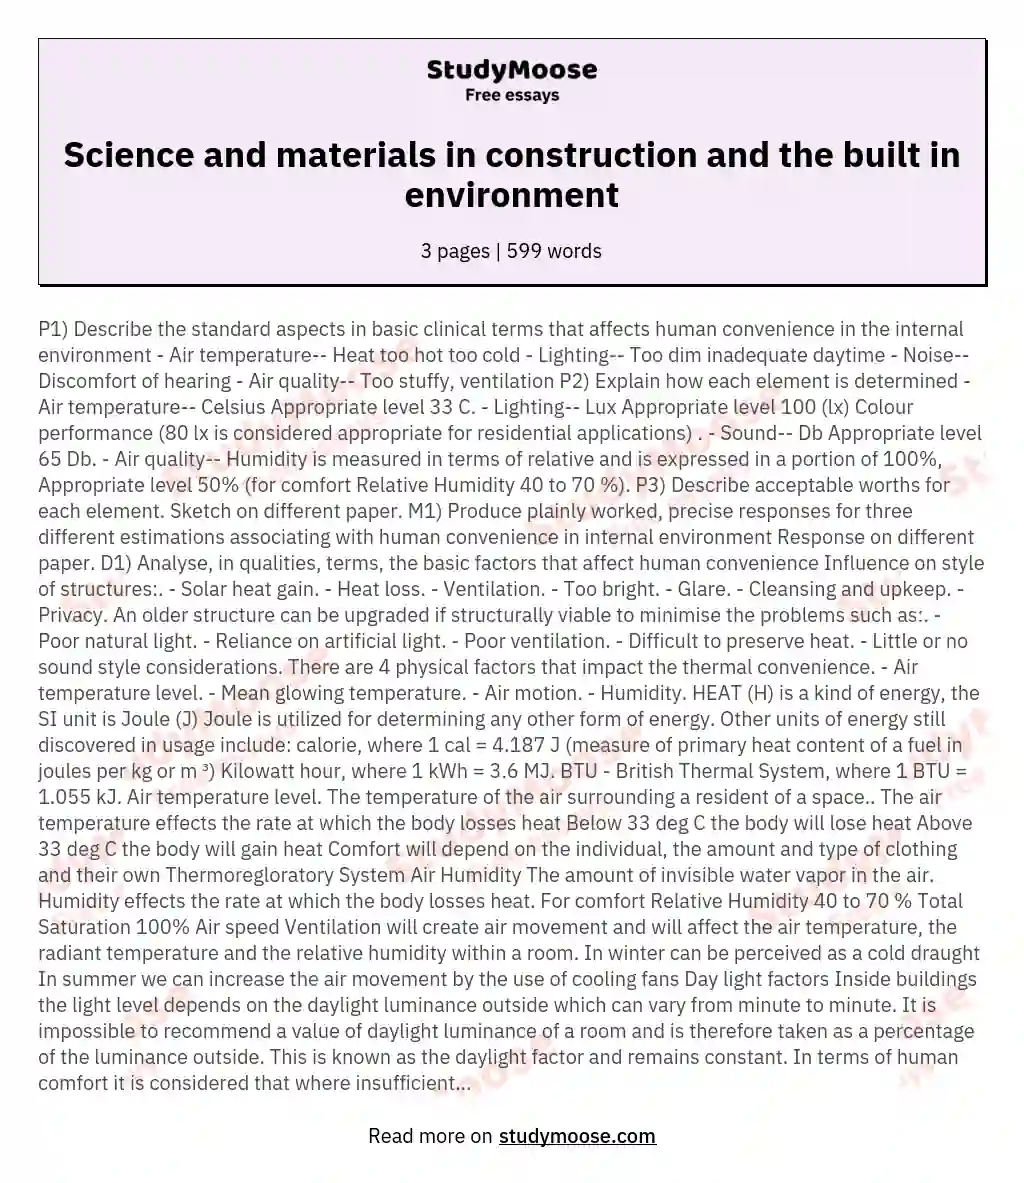 Science and materials in construction and the built in environment essay